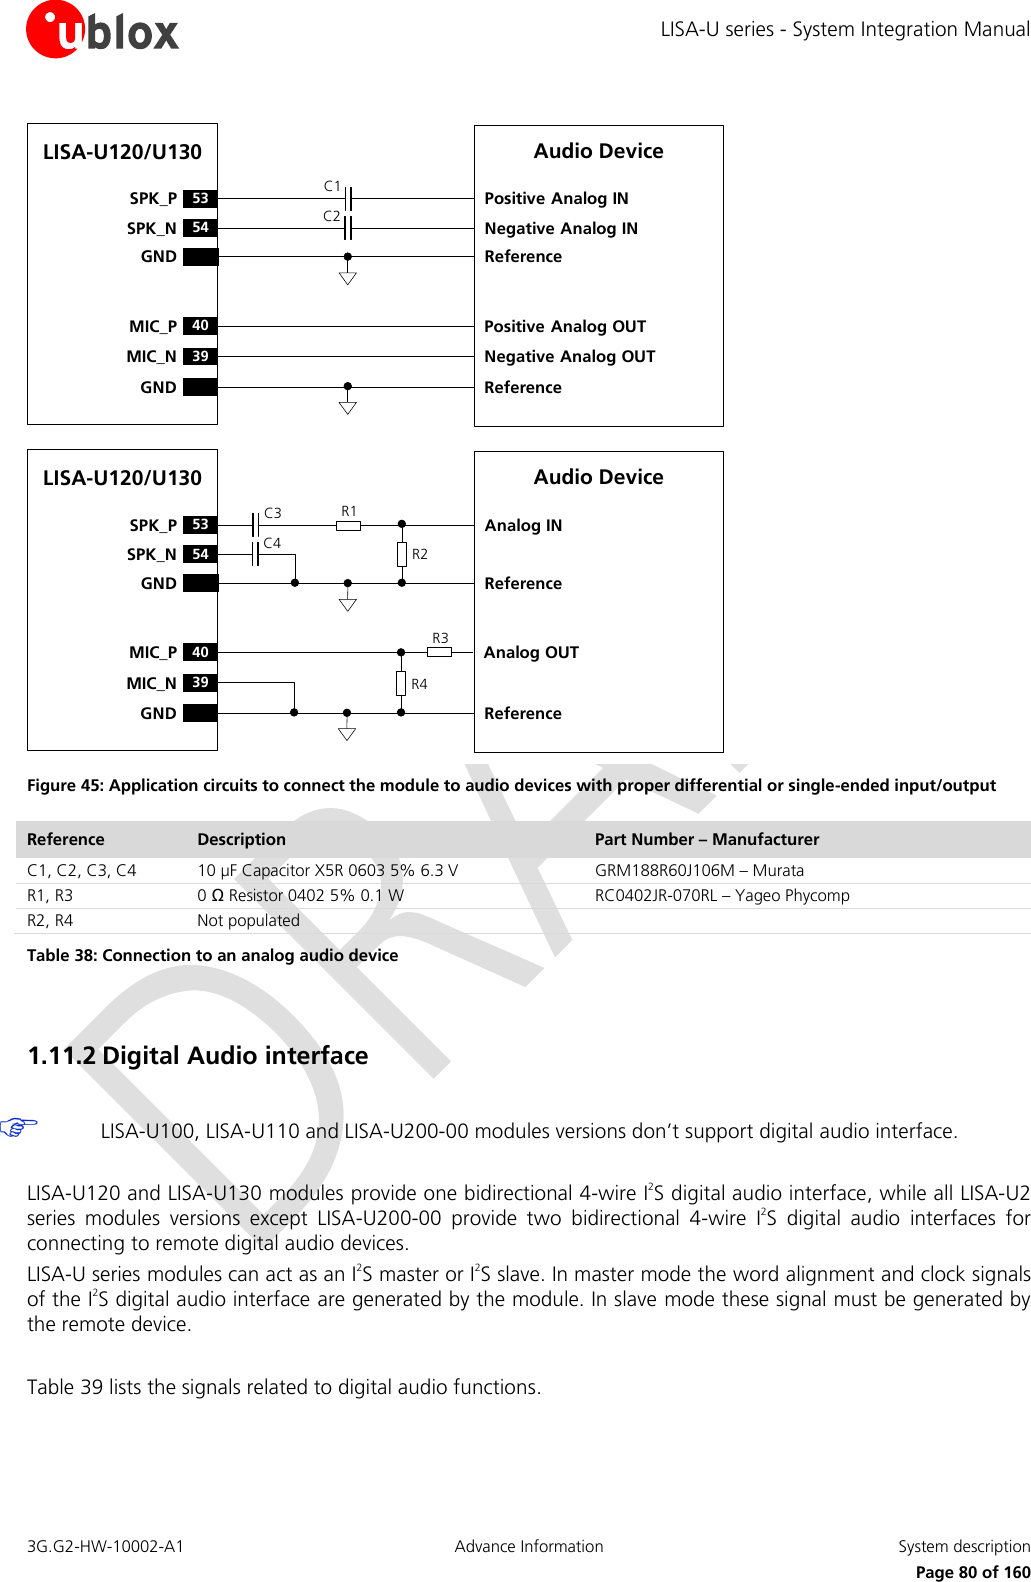 LISA-U series - System Integration Manual 3G.G2-HW-10002-A1  Advance Information  System description      Page 80 of 160 LISA-U120/U130C1C254SPK_N53SPK_PGND40MIC_PGNDNegative Analog INPositive Analog INNegative Analog OUTPositive Analog OUTAudio DeviceReferenceReference39MIC_NLISA-U120/U13054SPK_N53SPK_PGND40MIC_PGNDAnalog INAudio DeviceReferenceReference39MIC_NAnalog OUTC3C4 R2R1R4R3 Figure 45: Application circuits to connect the module to audio devices with proper differential or single-ended input/output Reference Description Part Number – Manufacturer C1, C2, C3, C4 10 µF Capacitor X5R 0603 5% 6.3 V  GRM188R60J106M – Murata R1, R3 0 Ω Resistor 0402 5% 0.1 W  RC0402JR-070RL – Yageo Phycomp R2, R4 Not populated  Table 38: Connection to an analog audio device  1.11.2 Digital Audio interface    LISA-U100, LISA-U110 and LISA-U200-00 modules versions don’t support digital audio interface.  LISA-U120 and LISA-U130 modules provide one bidirectional 4-wire I2S digital audio interface, while all LISA-U2 series  modules  versions  except  LISA-U200-00  provide  two  bidirectional  4-wire  I2S  digital  audio  interfaces  for connecting to remote digital audio devices. LISA-U series modules can act as an I2S master or I2S slave. In master mode the word alignment and clock signals of the I2S digital audio interface are generated by the module. In slave mode these signal must be generated by the remote device.  Table 39 lists the signals related to digital audio functions.  